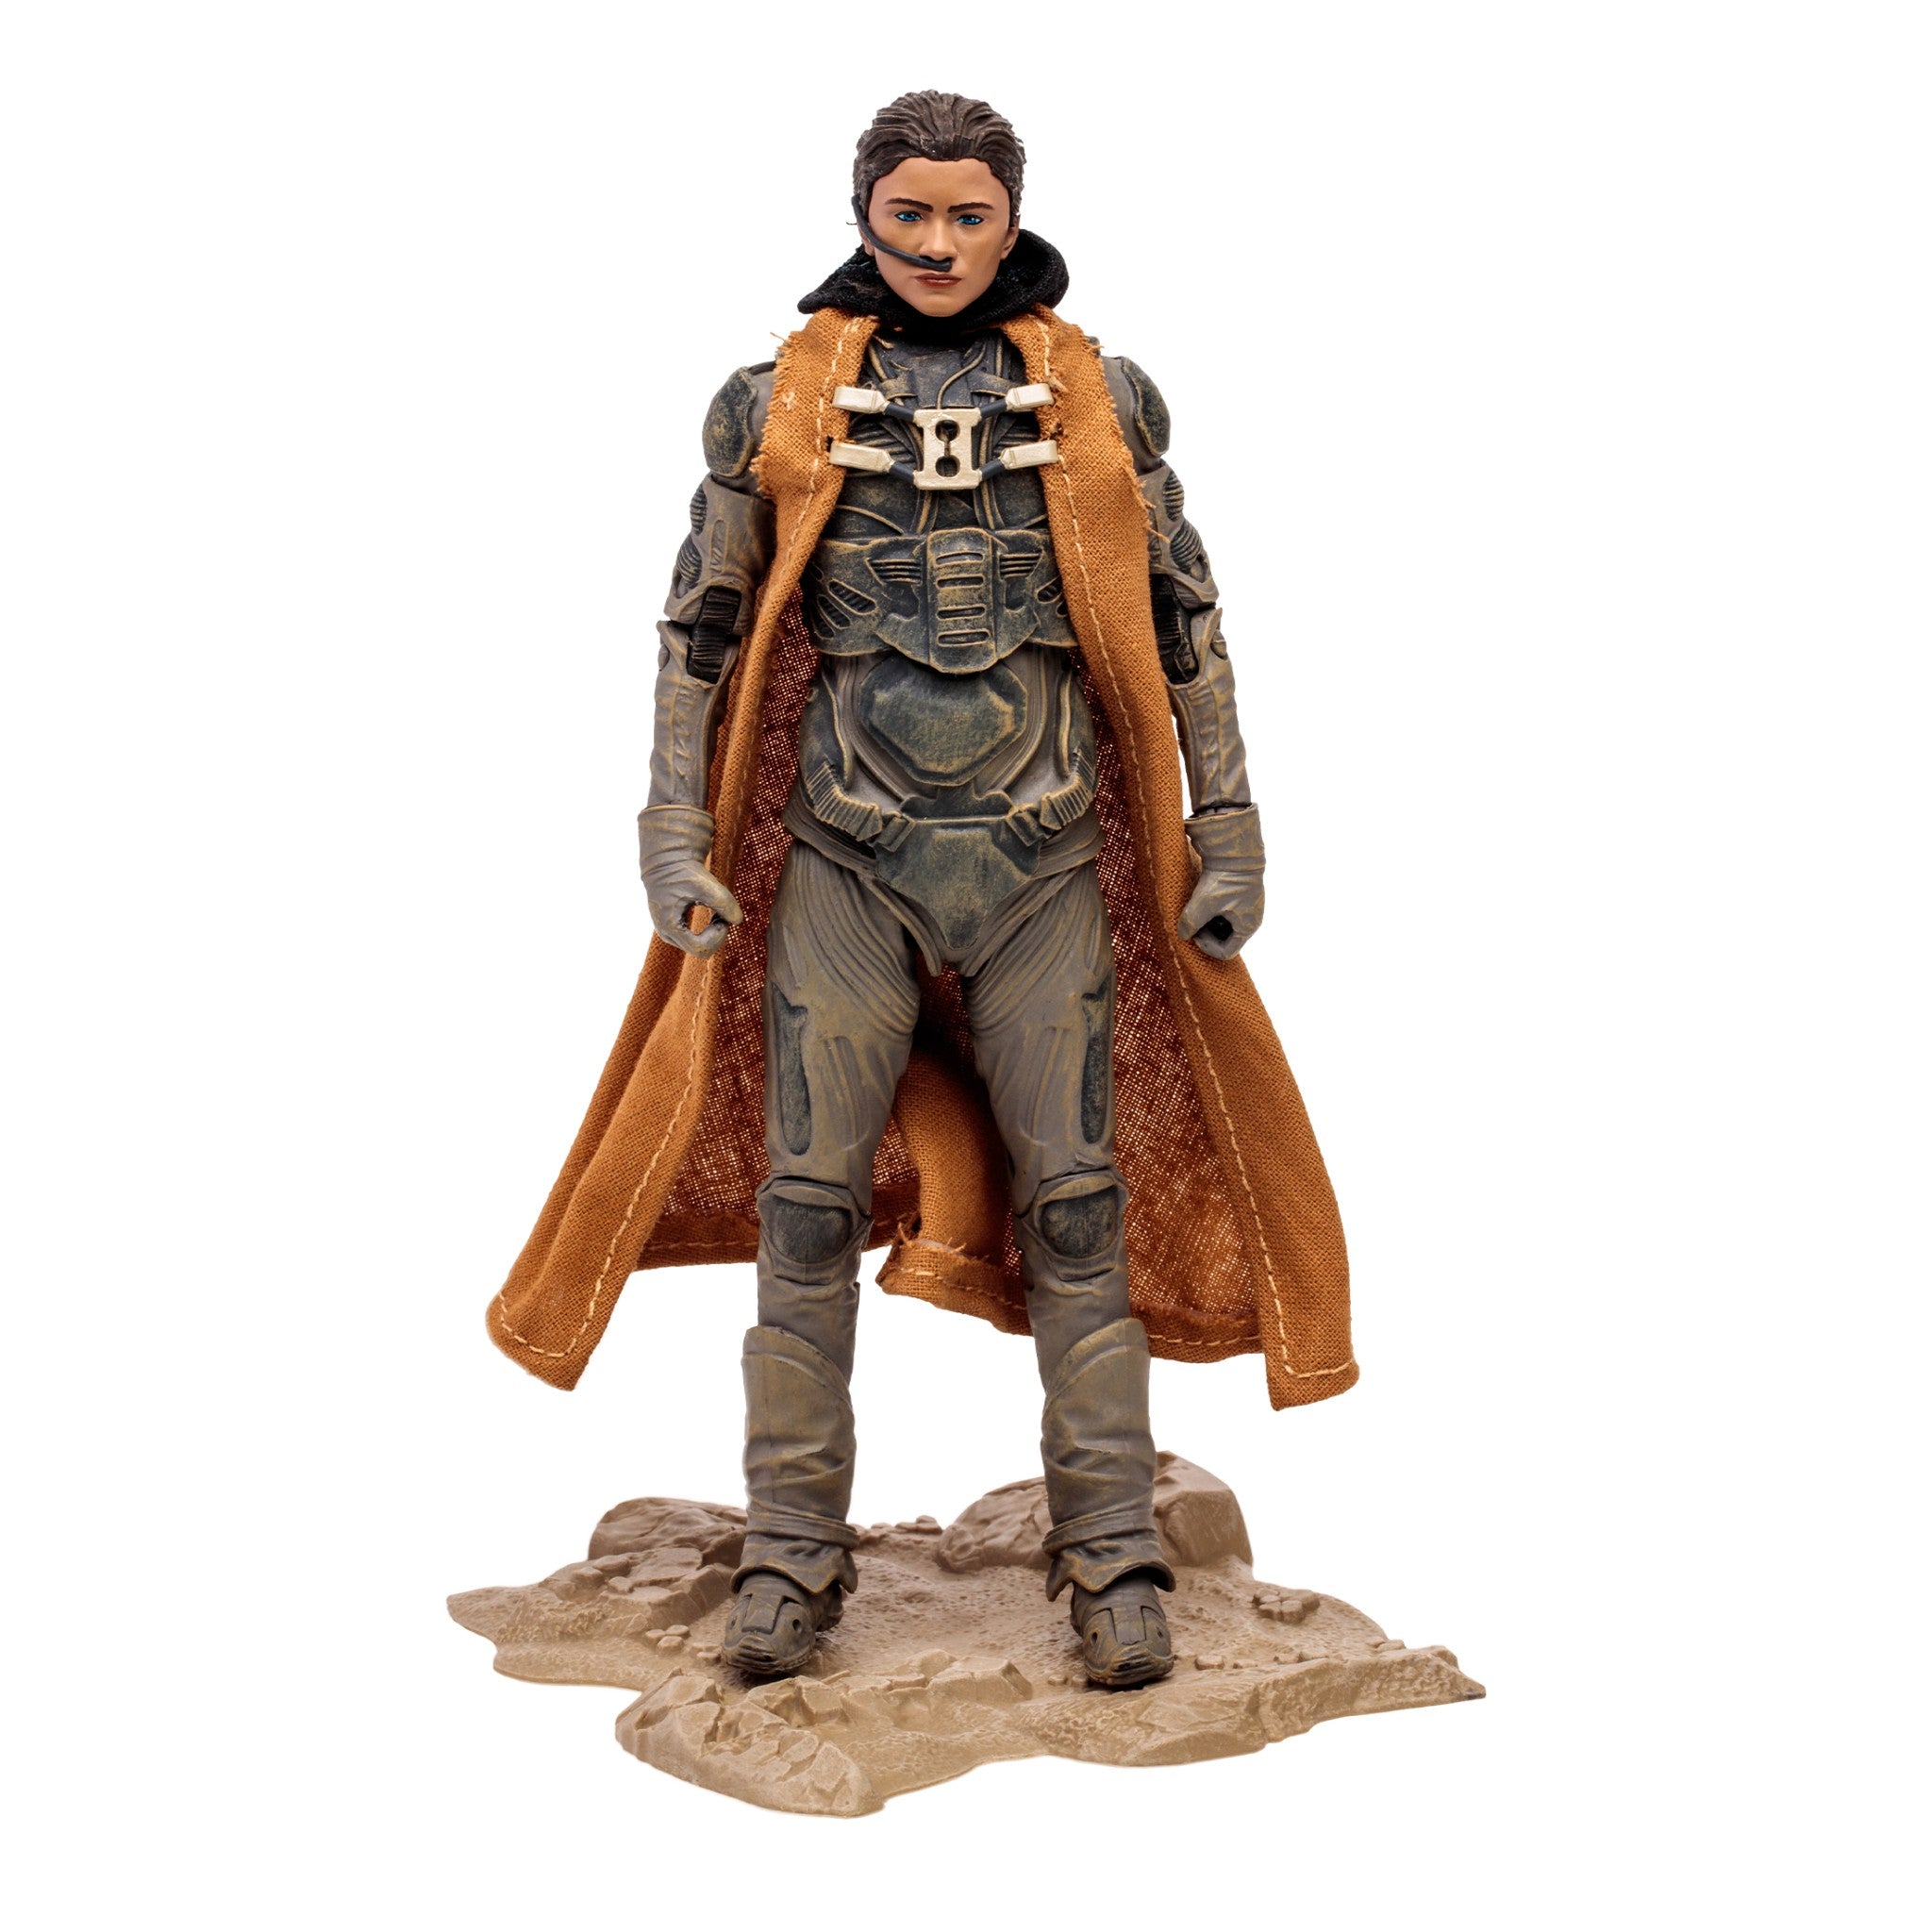 Dune Movie Part Two 2 Chani 7" Action Figure - McFarlane Toys-3